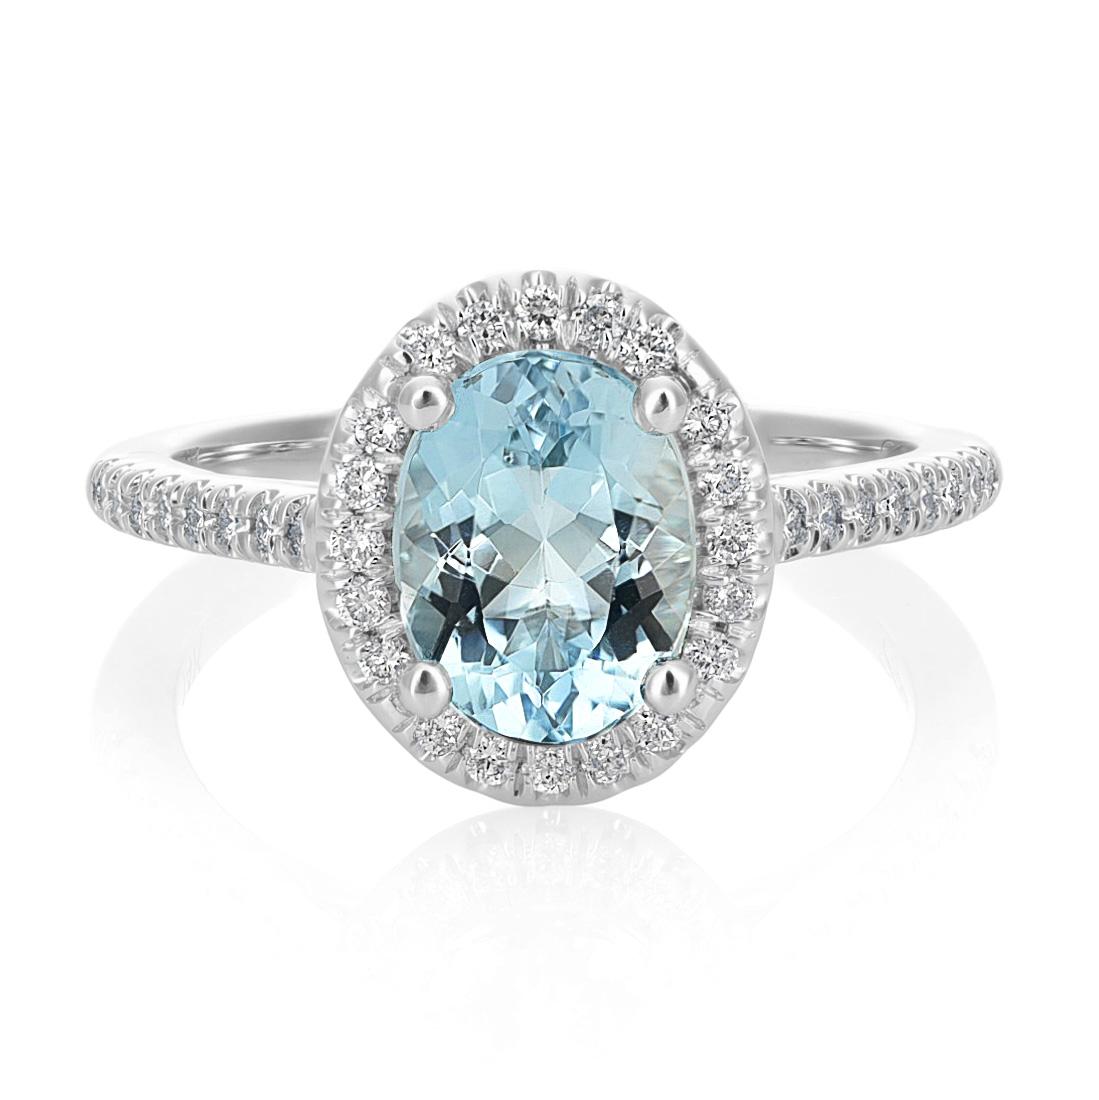 1.56 Carats Natural Aquamarine Diamonds set in 14K White Gold Ring In New Condition For Sale In Los Angeles, CA